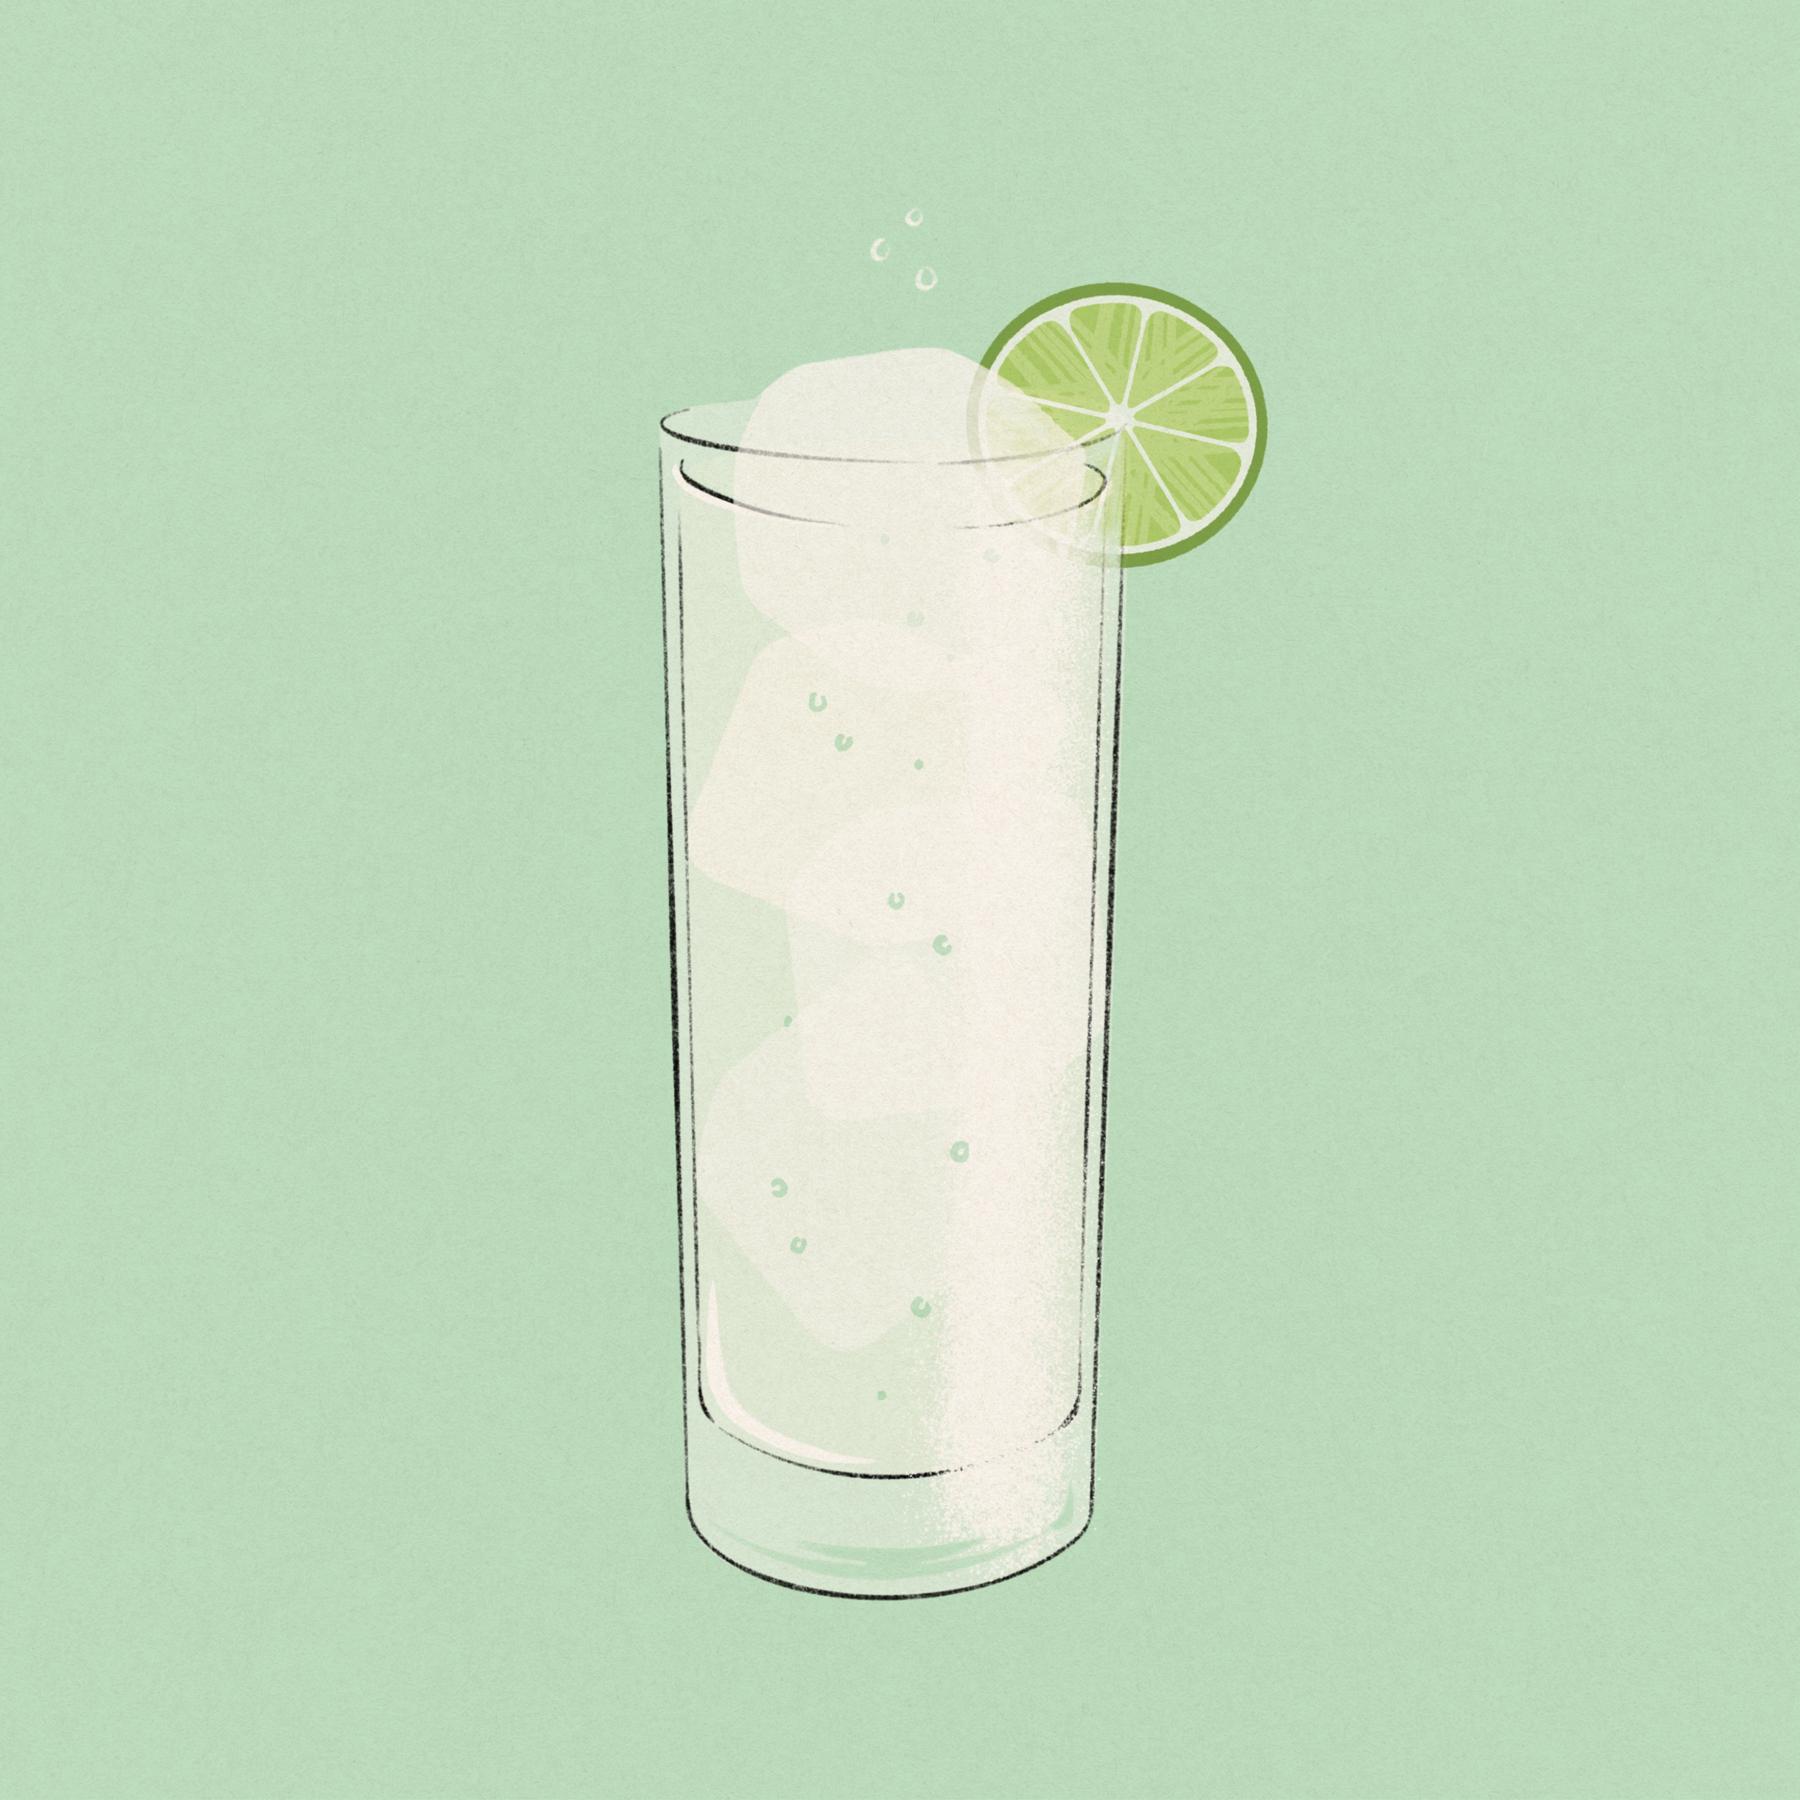 An example of the Improved Vodka Tonic, the mixed drink (drink) featuring tonic water, vodka, Dolin Blanc Vermouth de Chambéry, lime juice, and lime wheel; photo by Meghan Albers